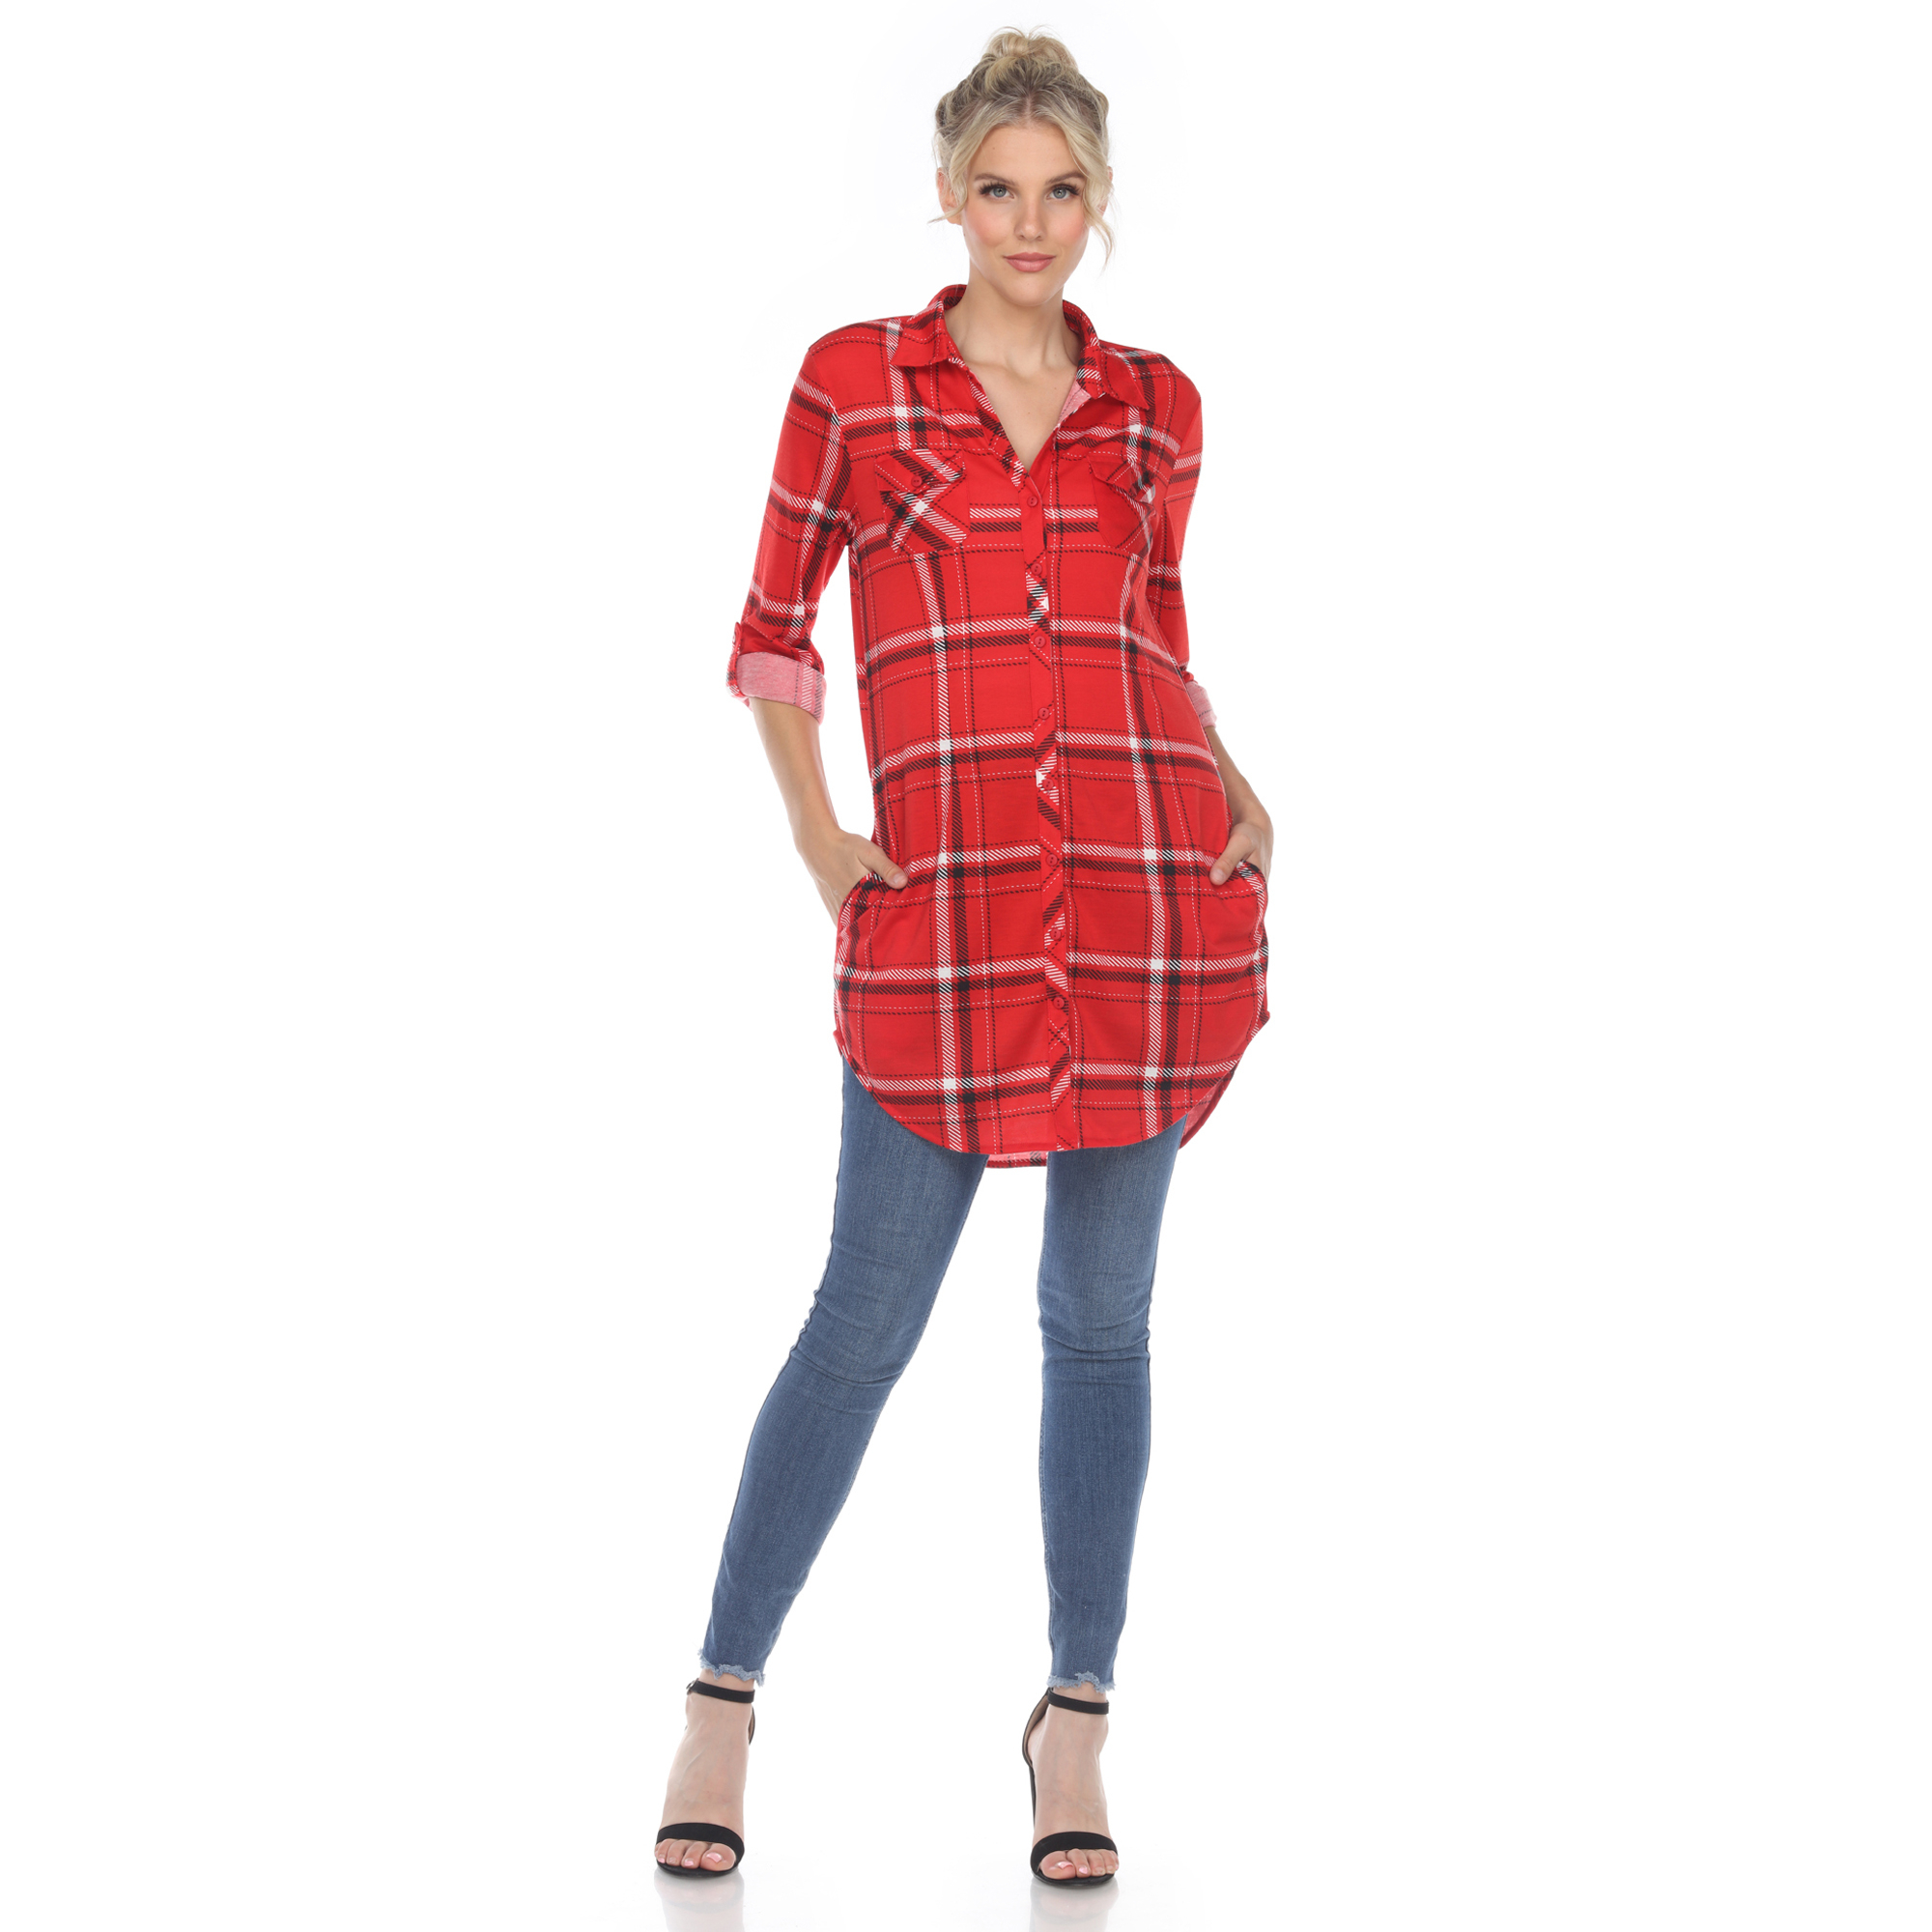 White Mark Women's Stretchy Windowpane Plaid Tunic Top - Red, X-Large